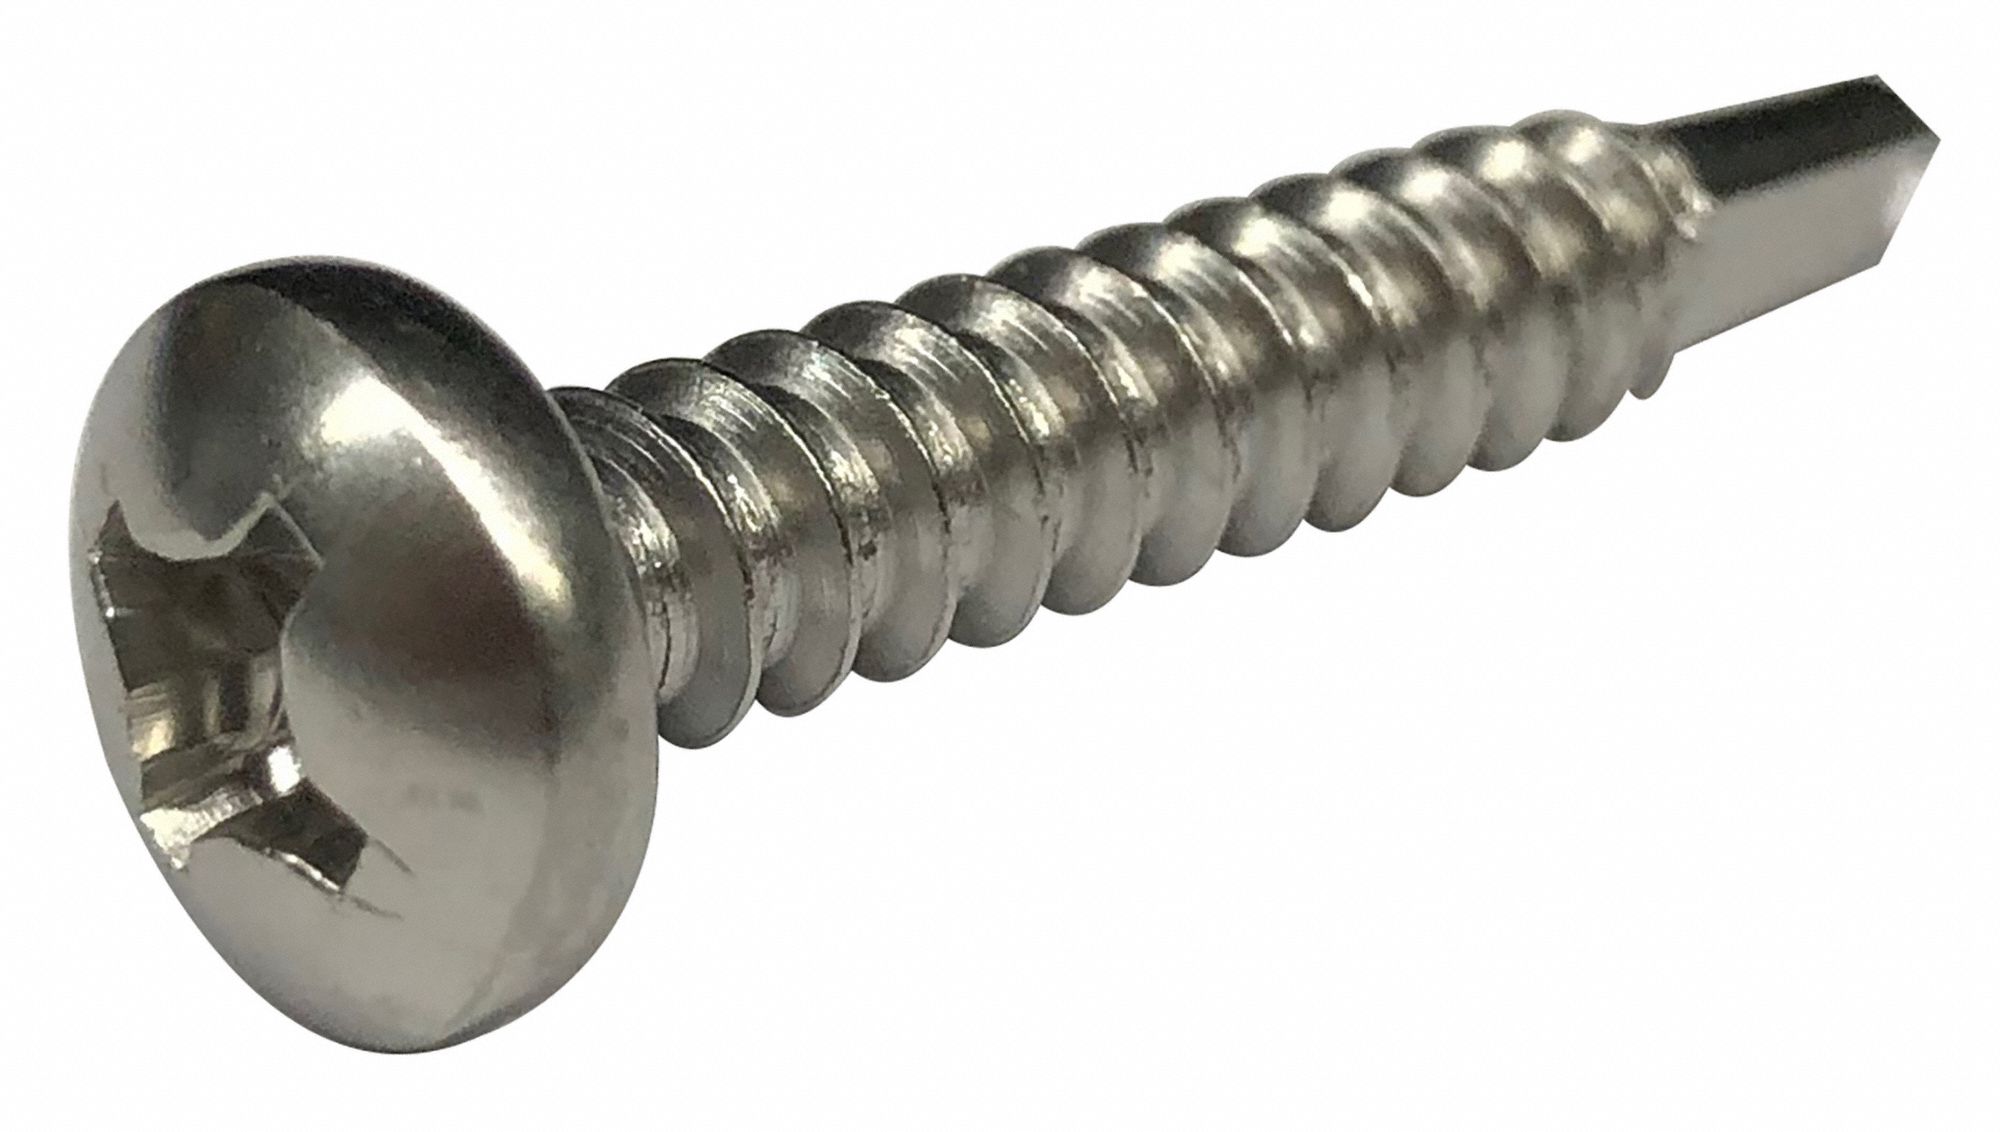 82 Degree Flat Head Plain Finish #6-32 Thread Size 3/8 Length Pack of 100 Type F Phillips Drive 18-8 Stainless Steel Thread Cutting Screw 